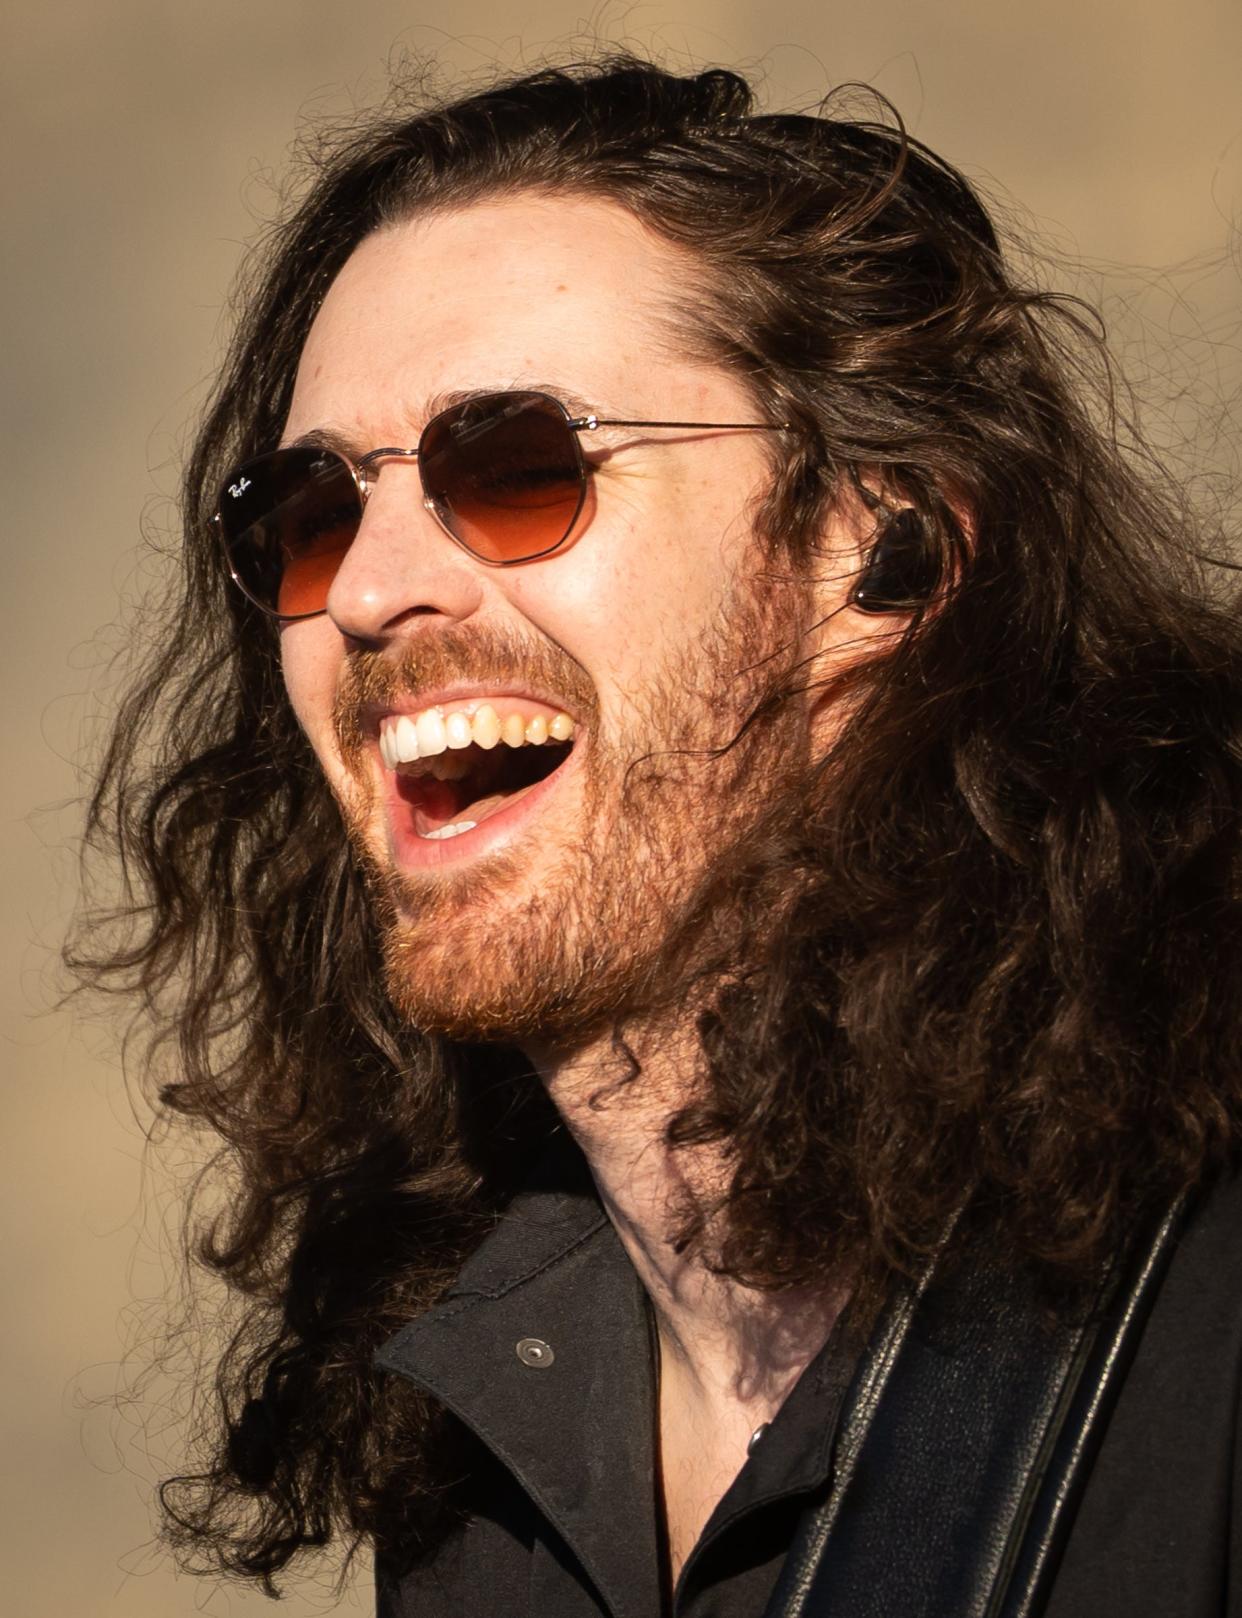 Irish musician Hozier, known for his literary-themed lyrics and political and social justice stances, will appear at the Schottenstein Center on Aug. 7.